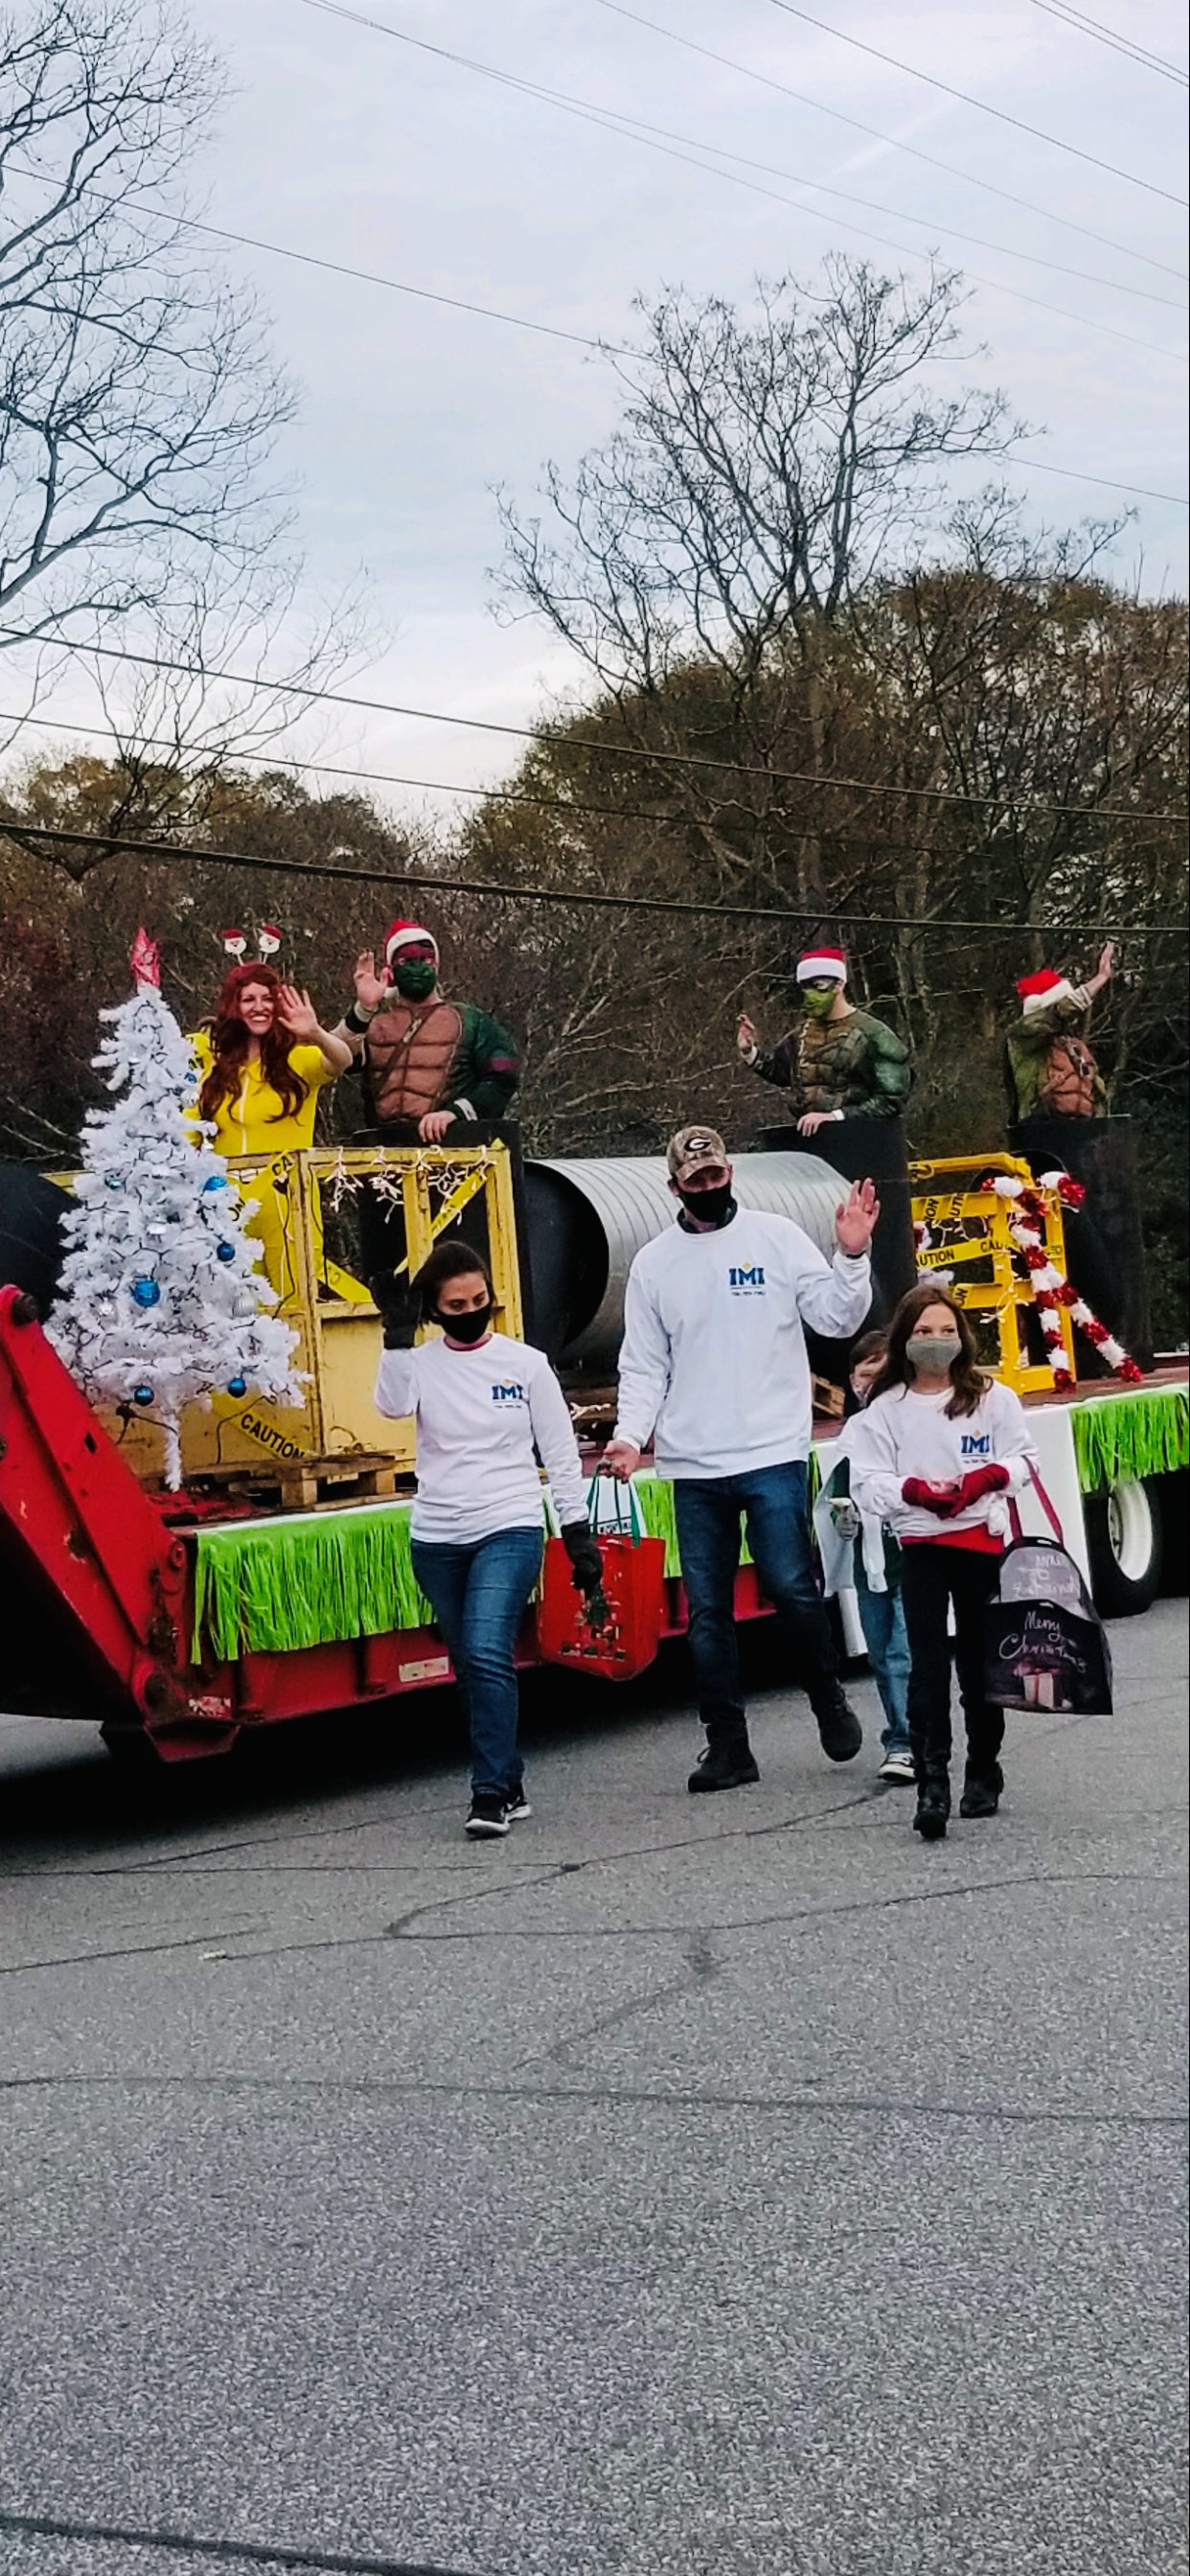 IMI Employees in the Parade